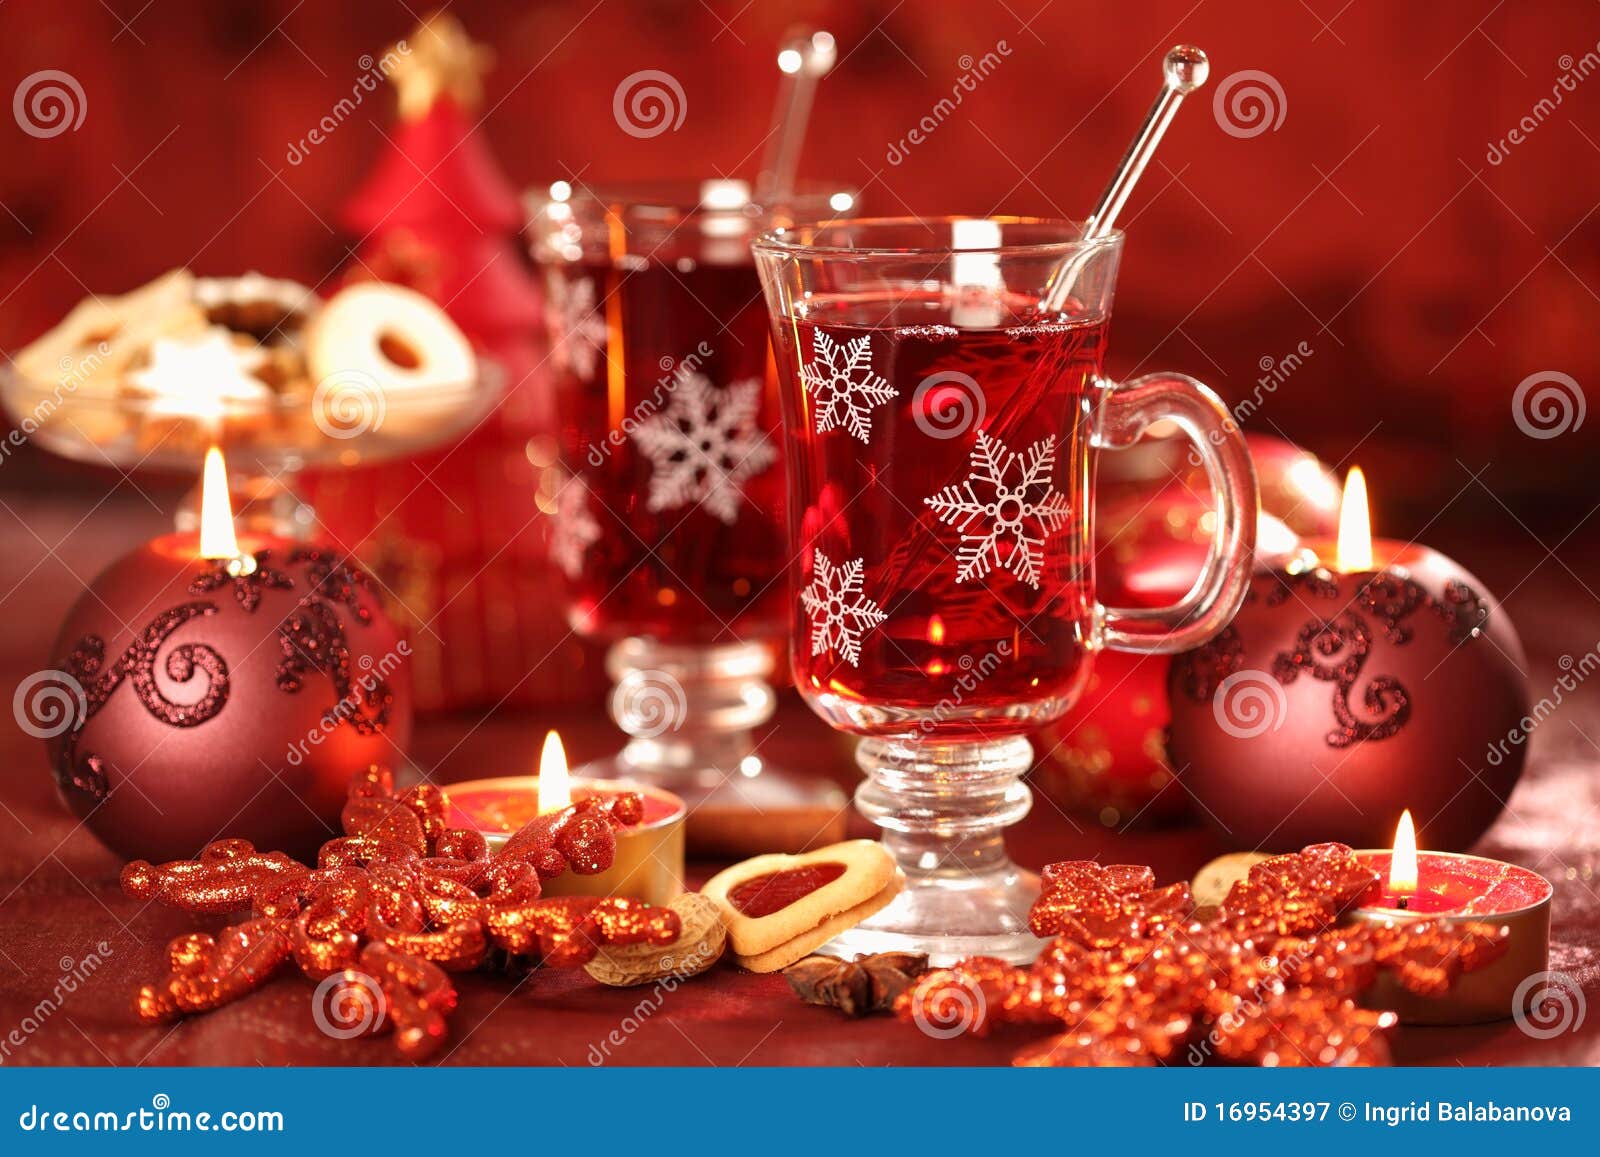 hot drink for winter and christmas